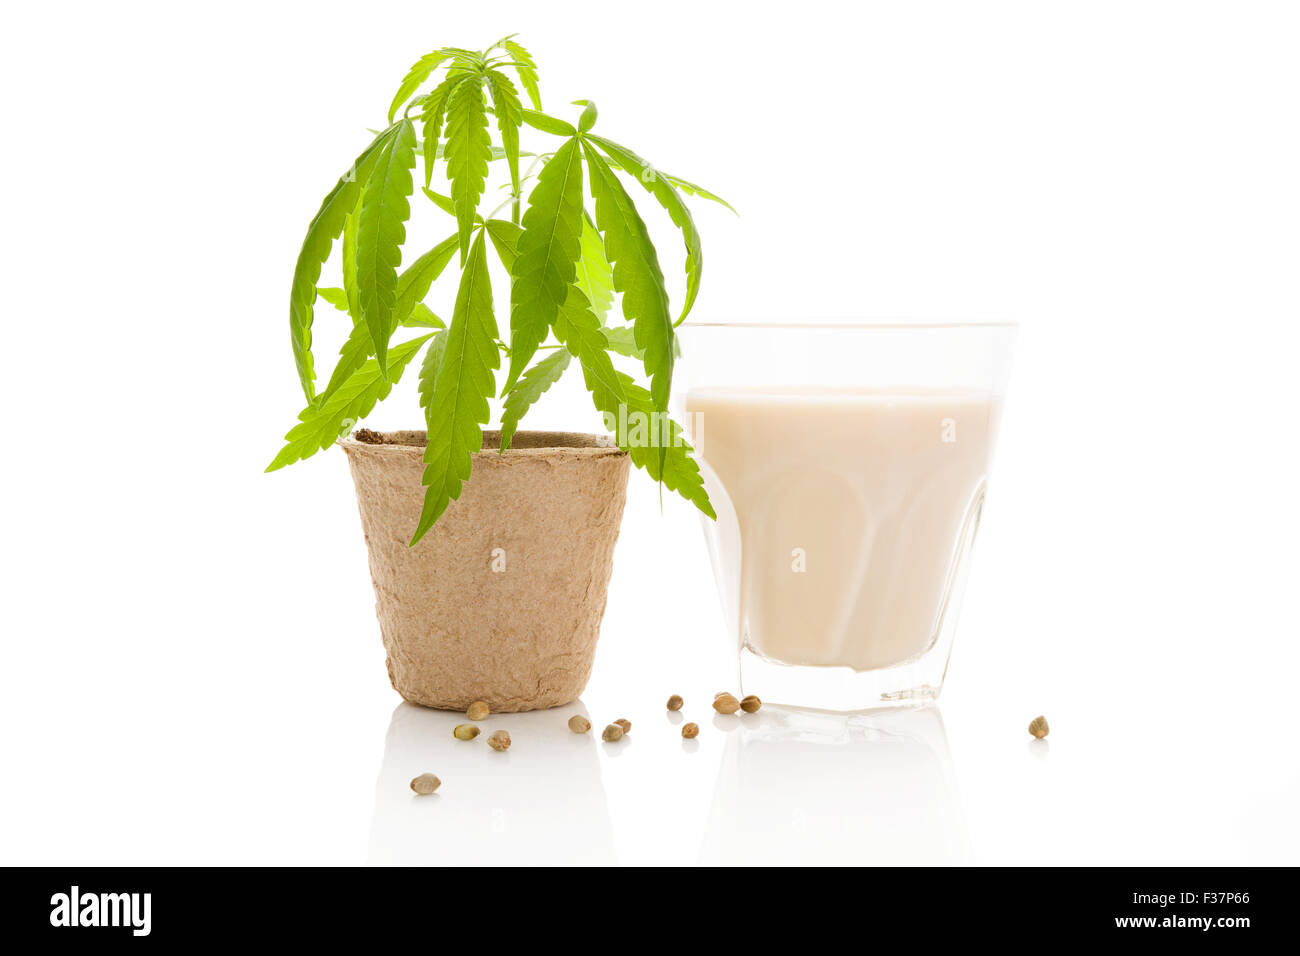 Non dairy milk, vegan eating. Hemp milk. Cannabis plant in pot and a glass of milk isolated on white background. Stock Photo